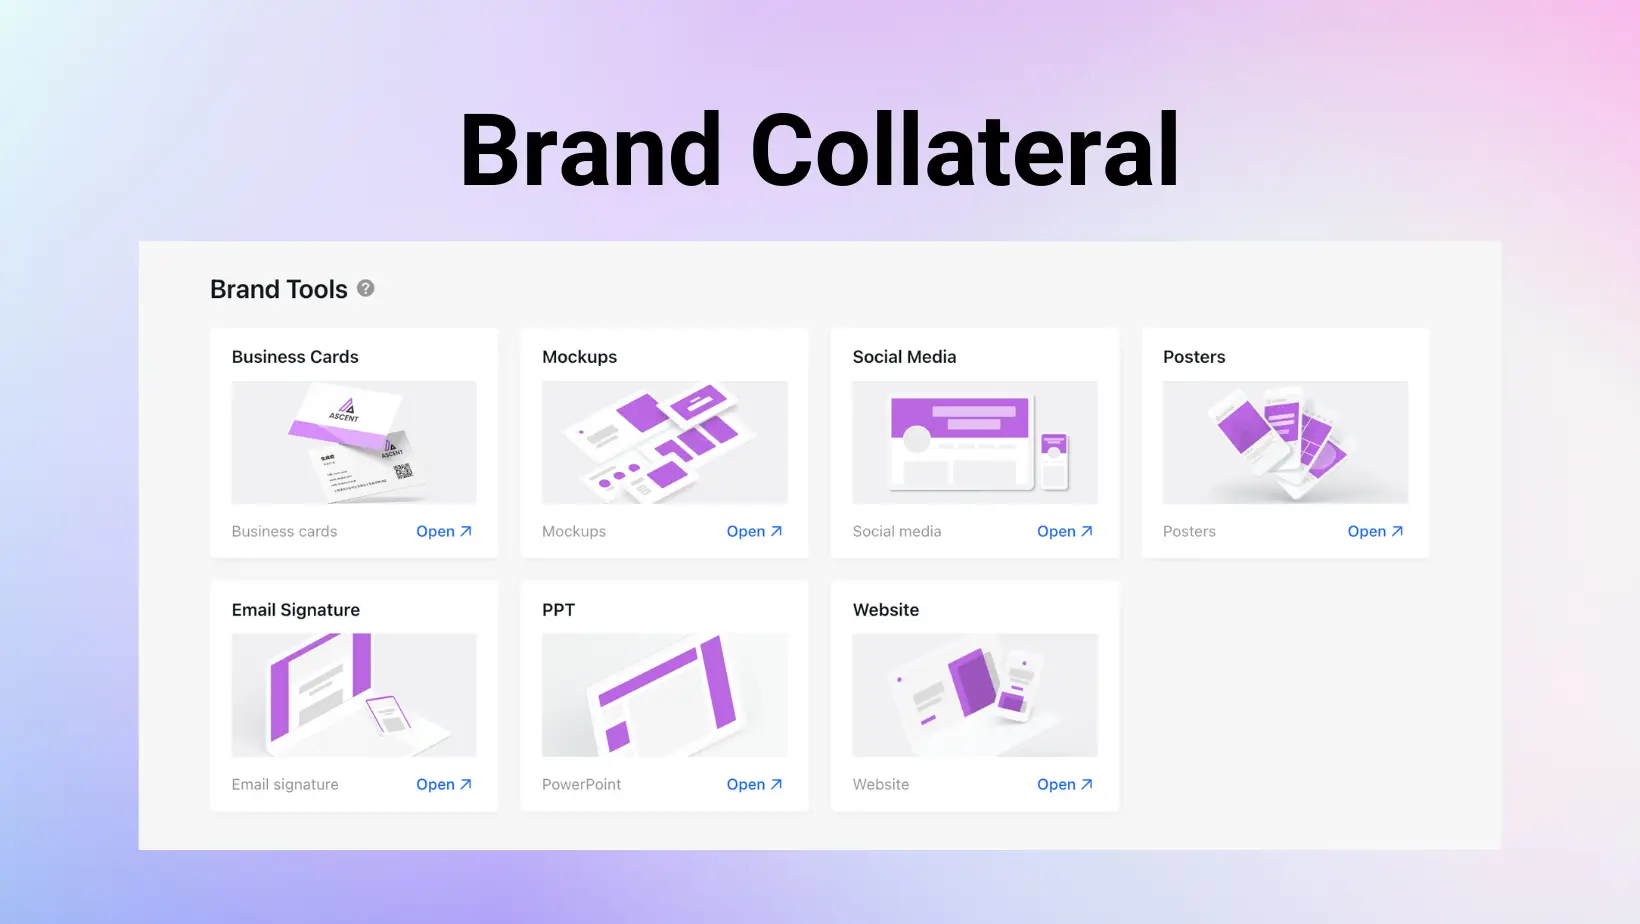 7 Types of Brand Collaterals You Can Generate Automatically With AI